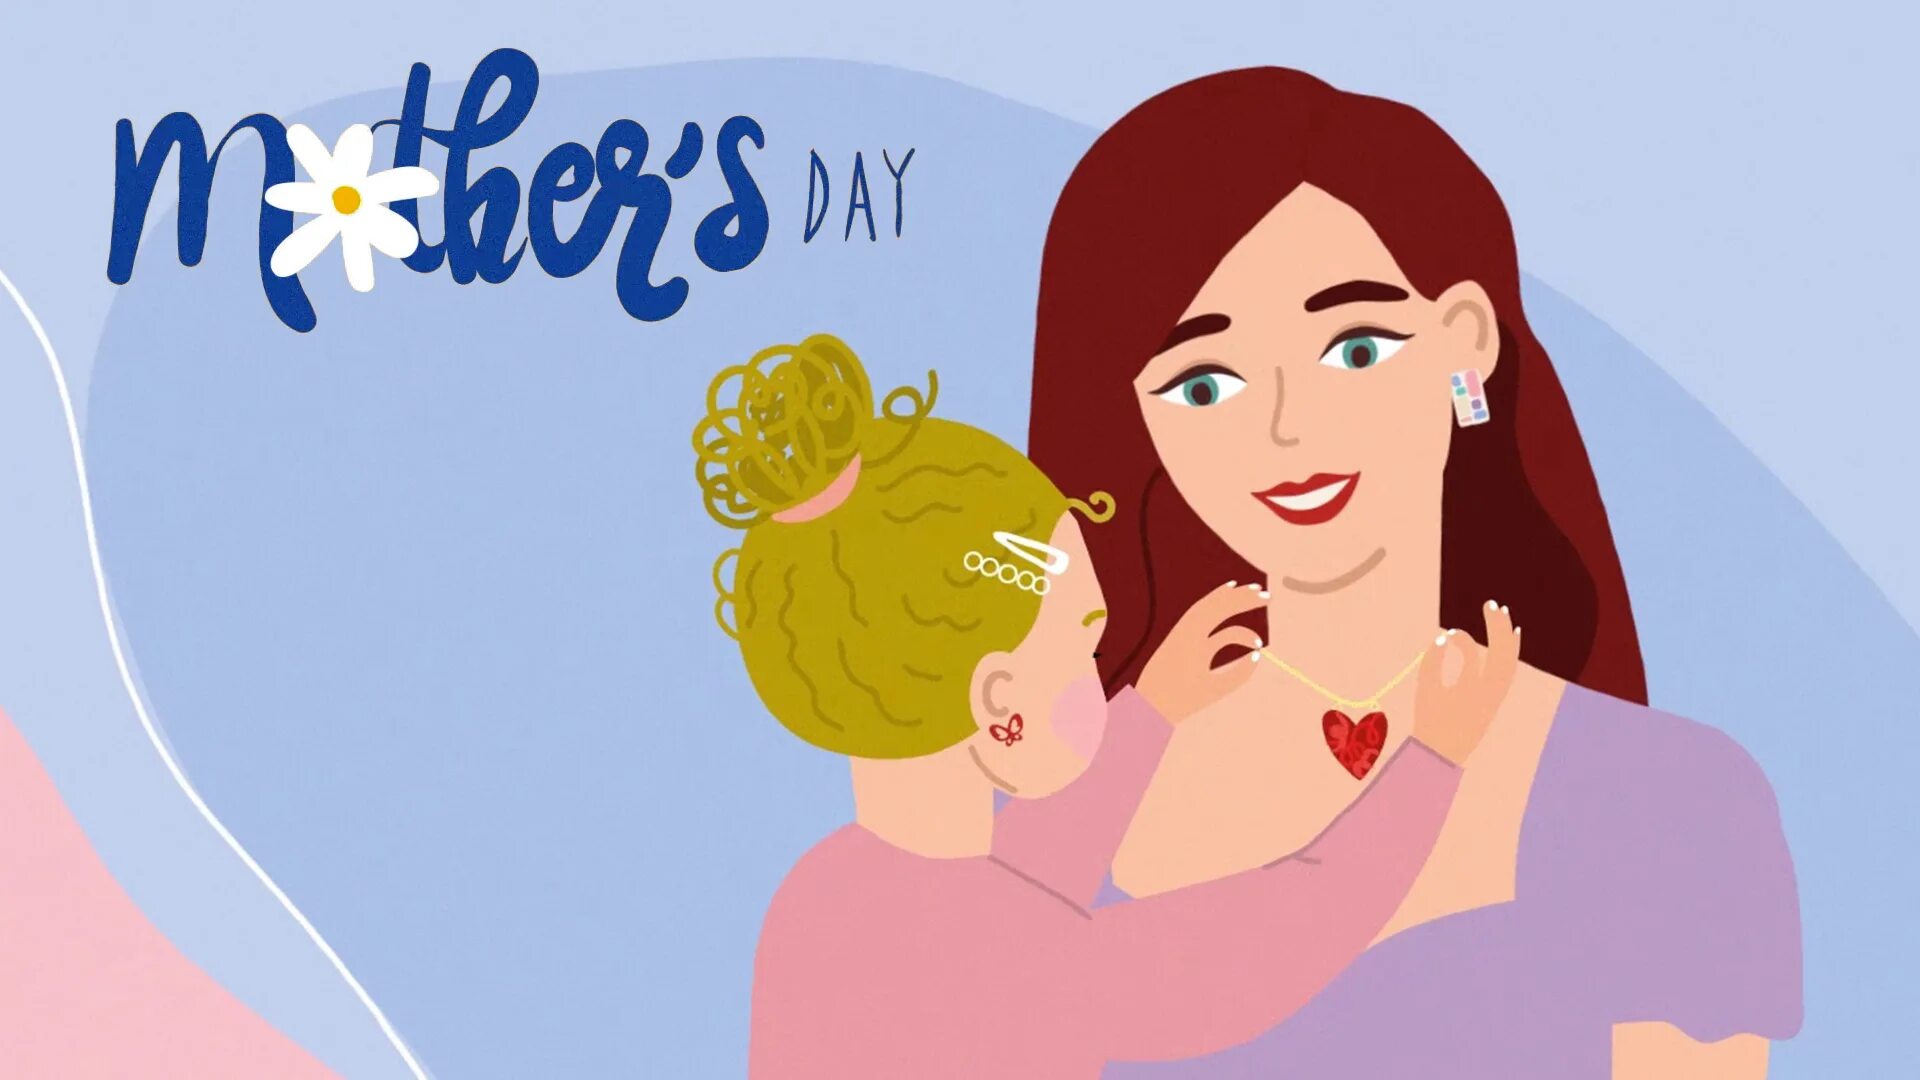 День матери. Mother`s Day. Картинки на день матери простые. Mother animation.